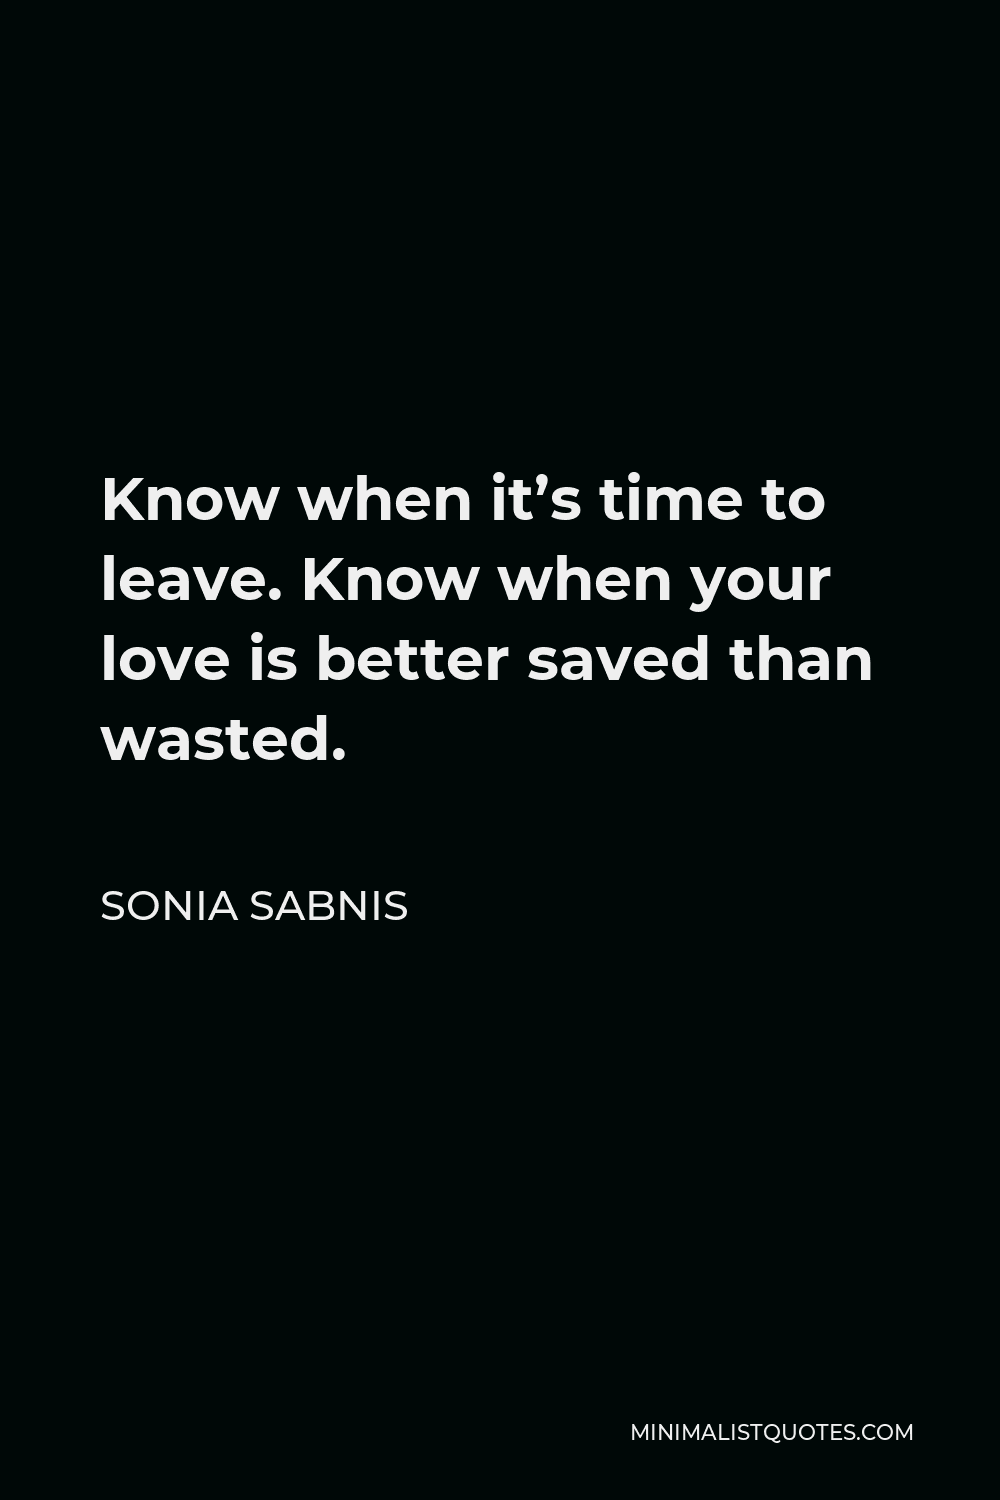 Sonia Sabnis Quote - Know when it’s time to leave. Know when your love is better saved than wasted.